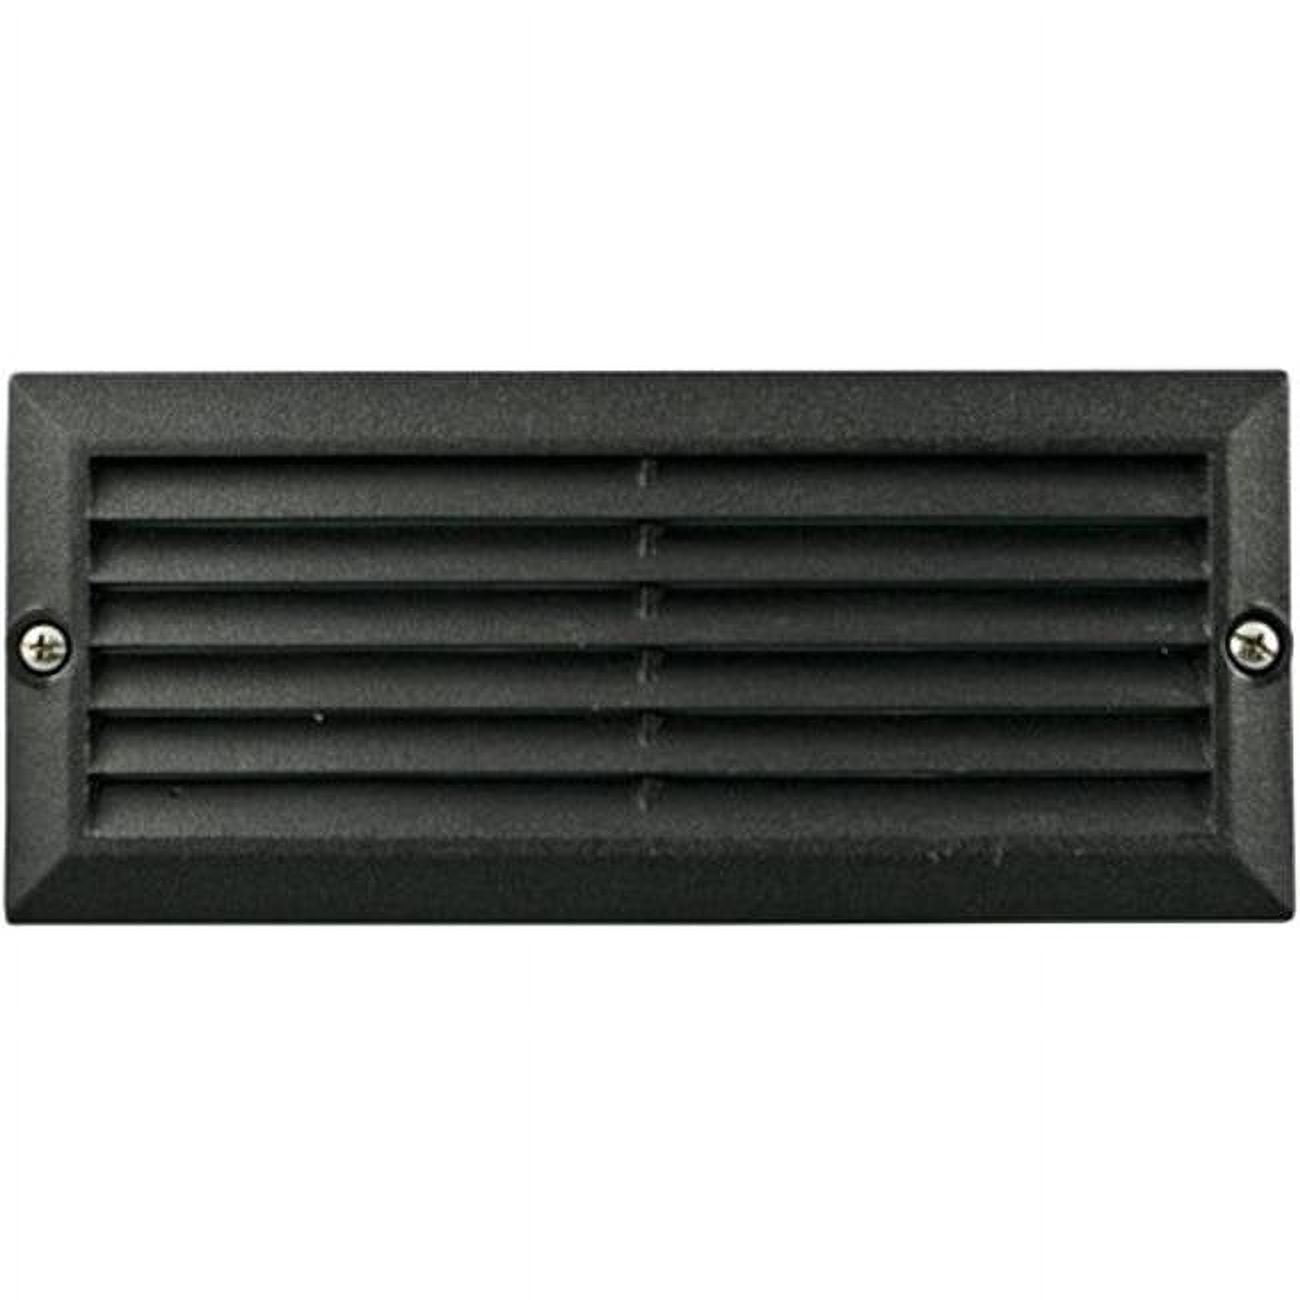 Picture of Dabmar Lighting LV600-B Cast Aluminum Recessed Louvered Brick, Step & Wall Light, Black - 3.97 x 9.13 x 3.25 in.